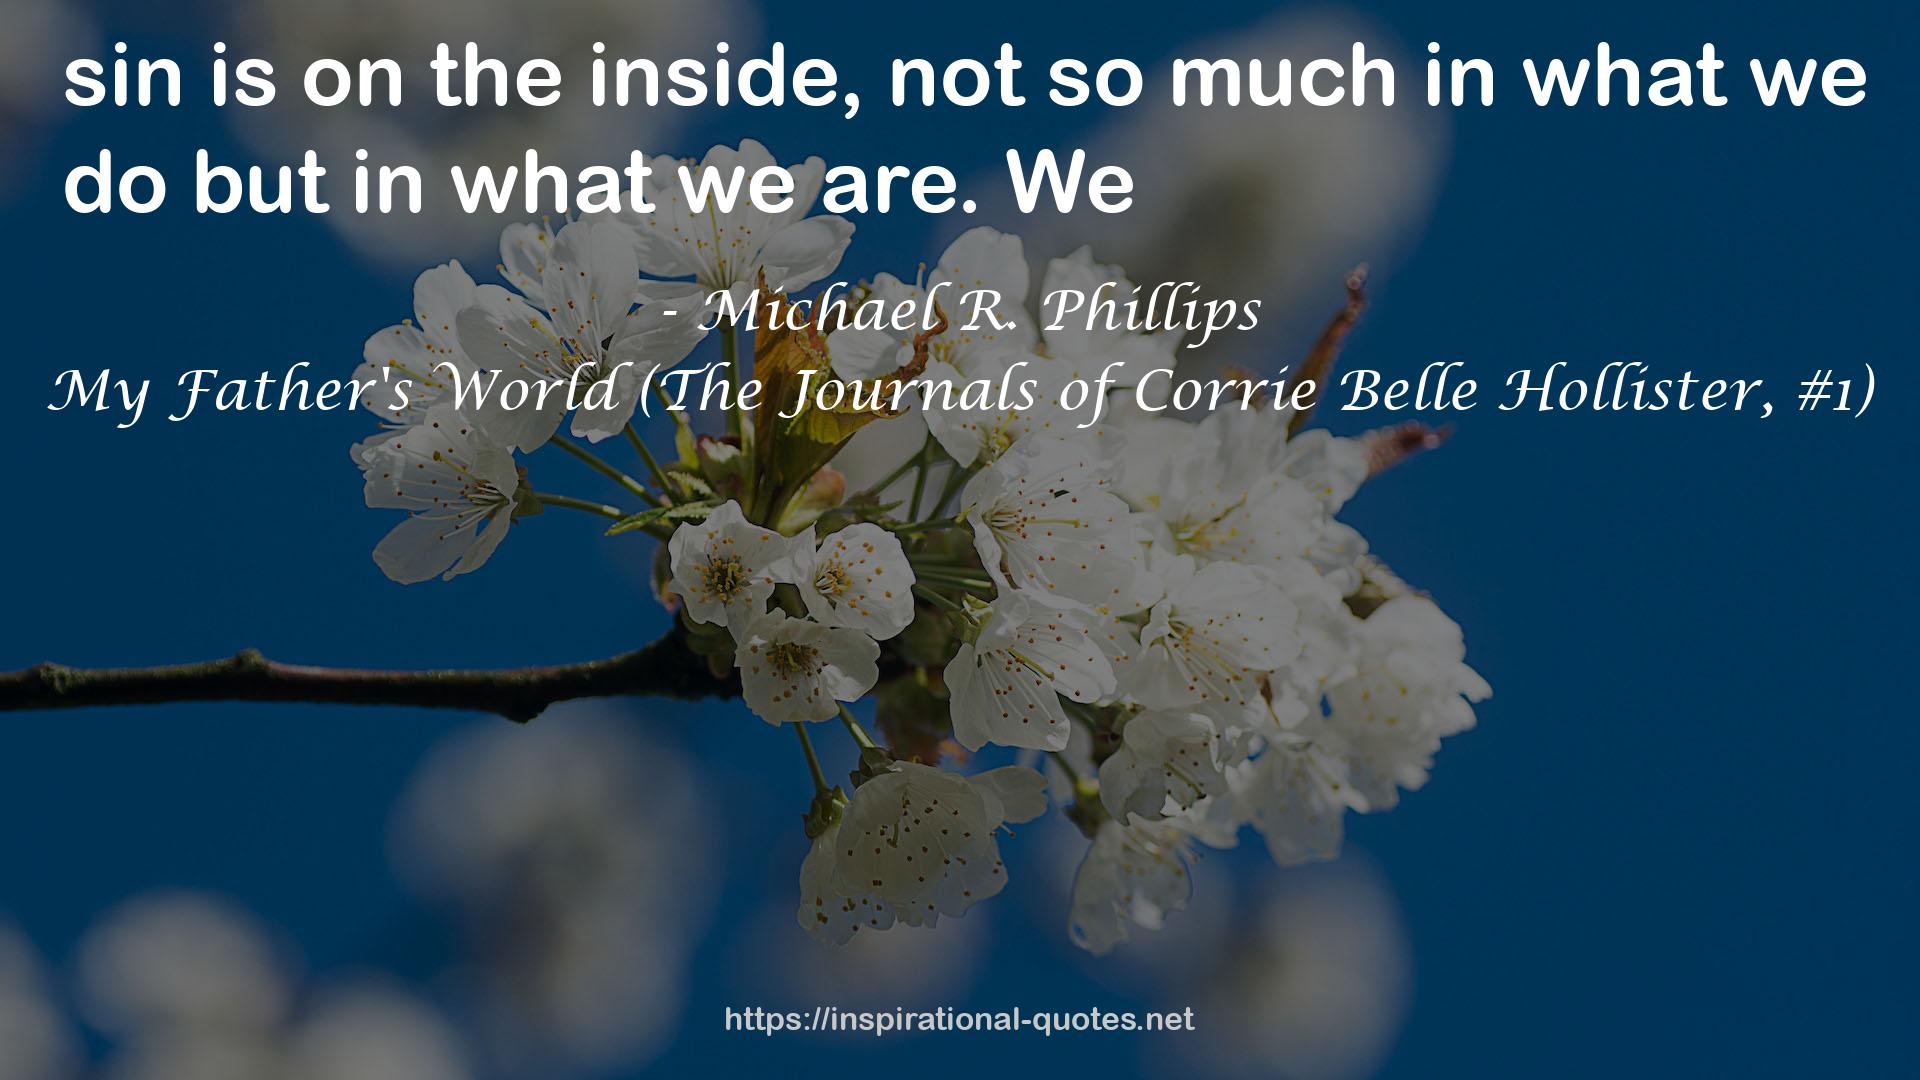 My Father's World (The Journals of Corrie Belle Hollister, #1) QUOTES